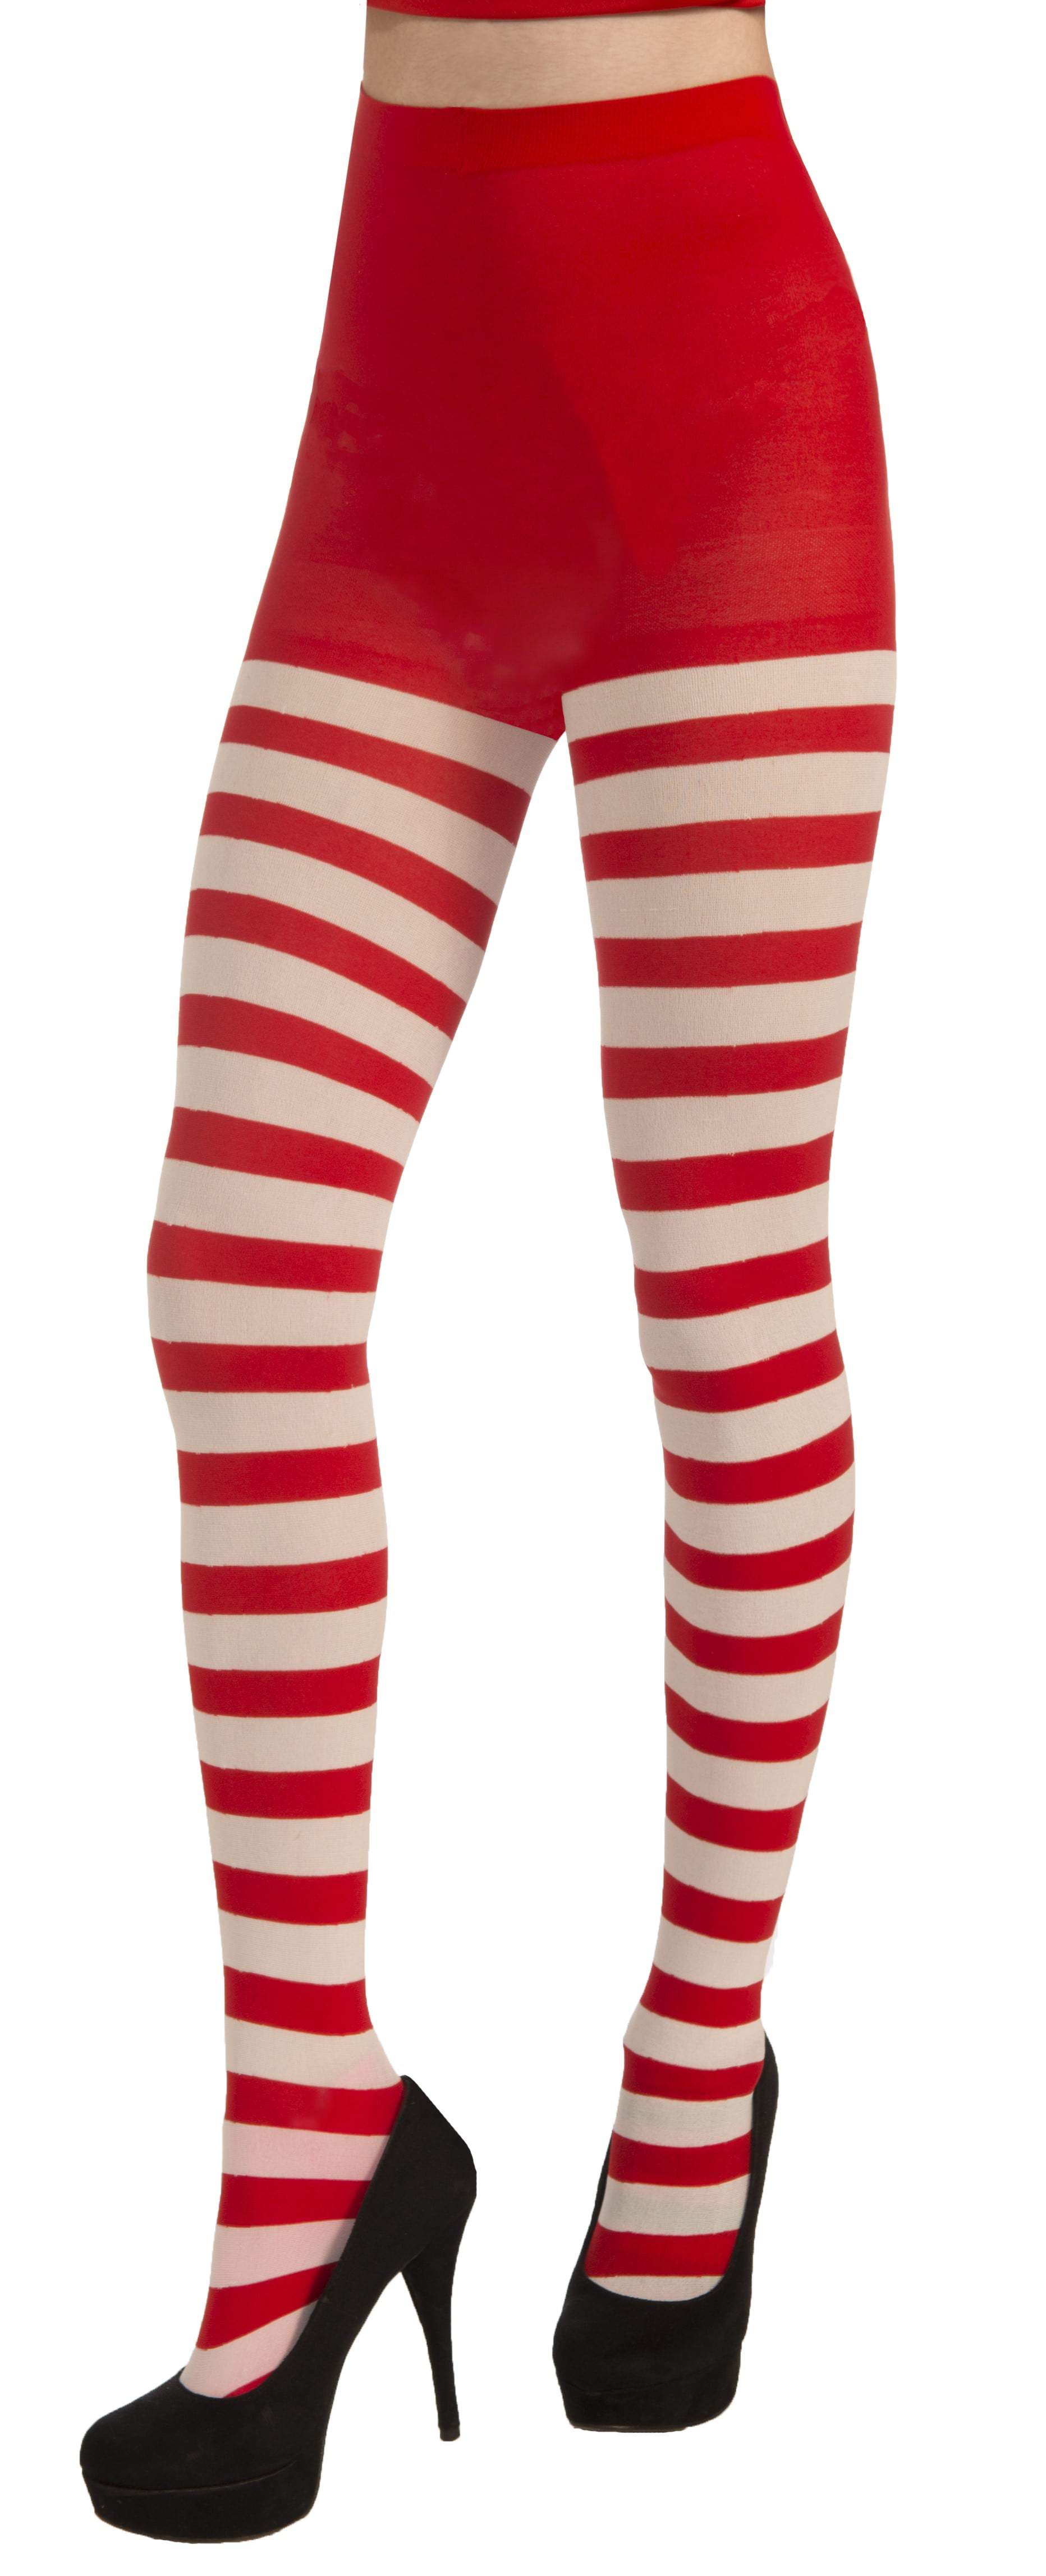 White Red Striped Stockings Tights Elf Christmas Costume Accessory 